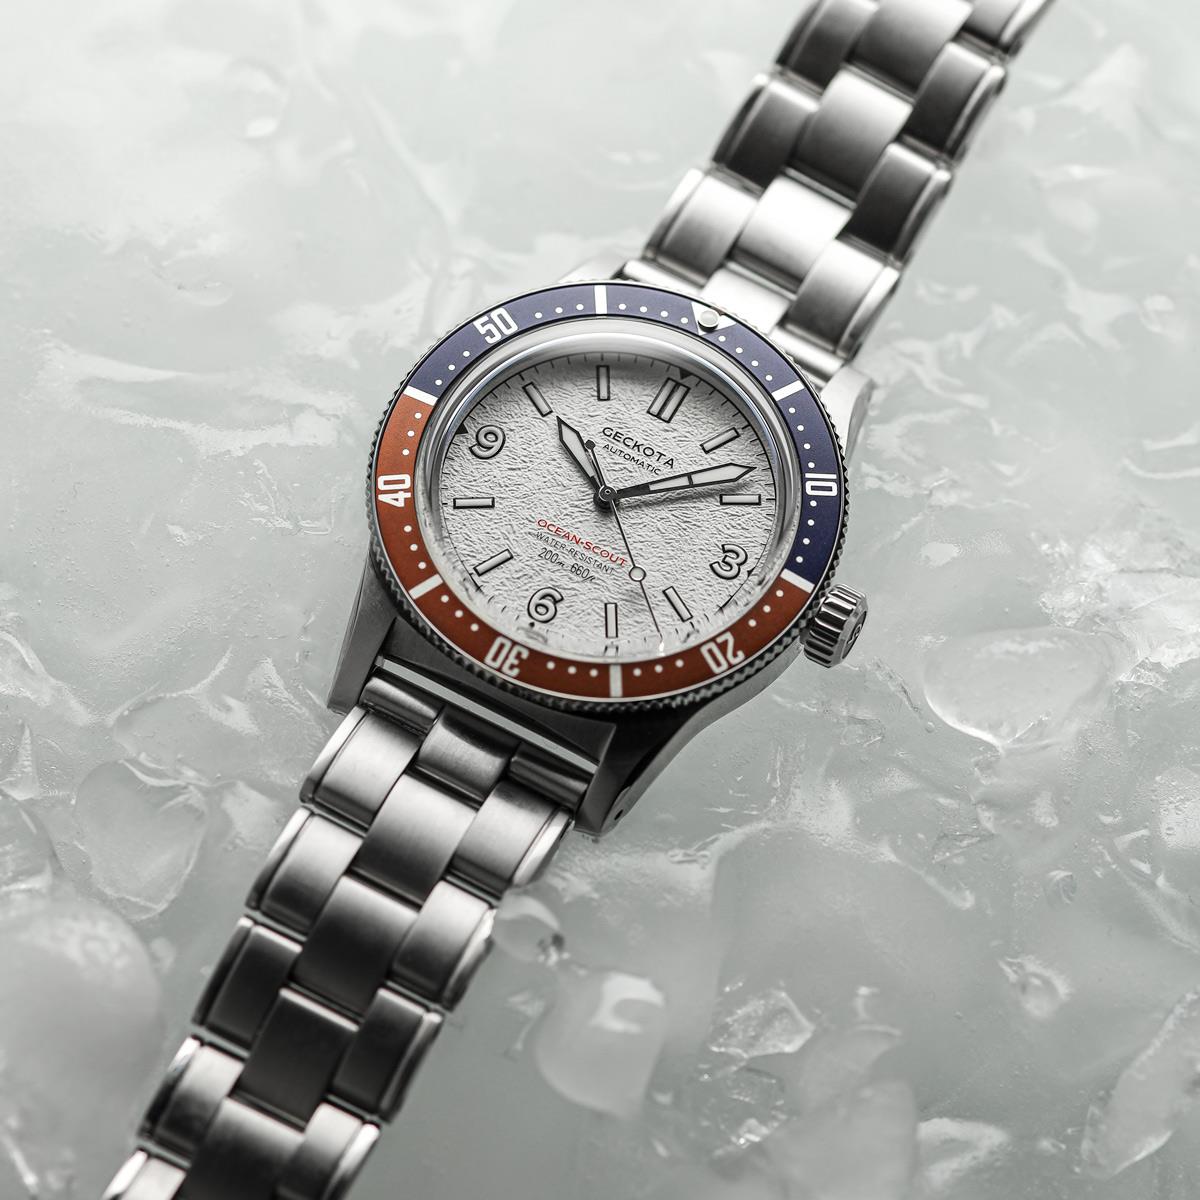 Geckota Ocean-Scout Dive Watch - BWD Arctic - Berwick Stainless Steel Strap - additional image 4